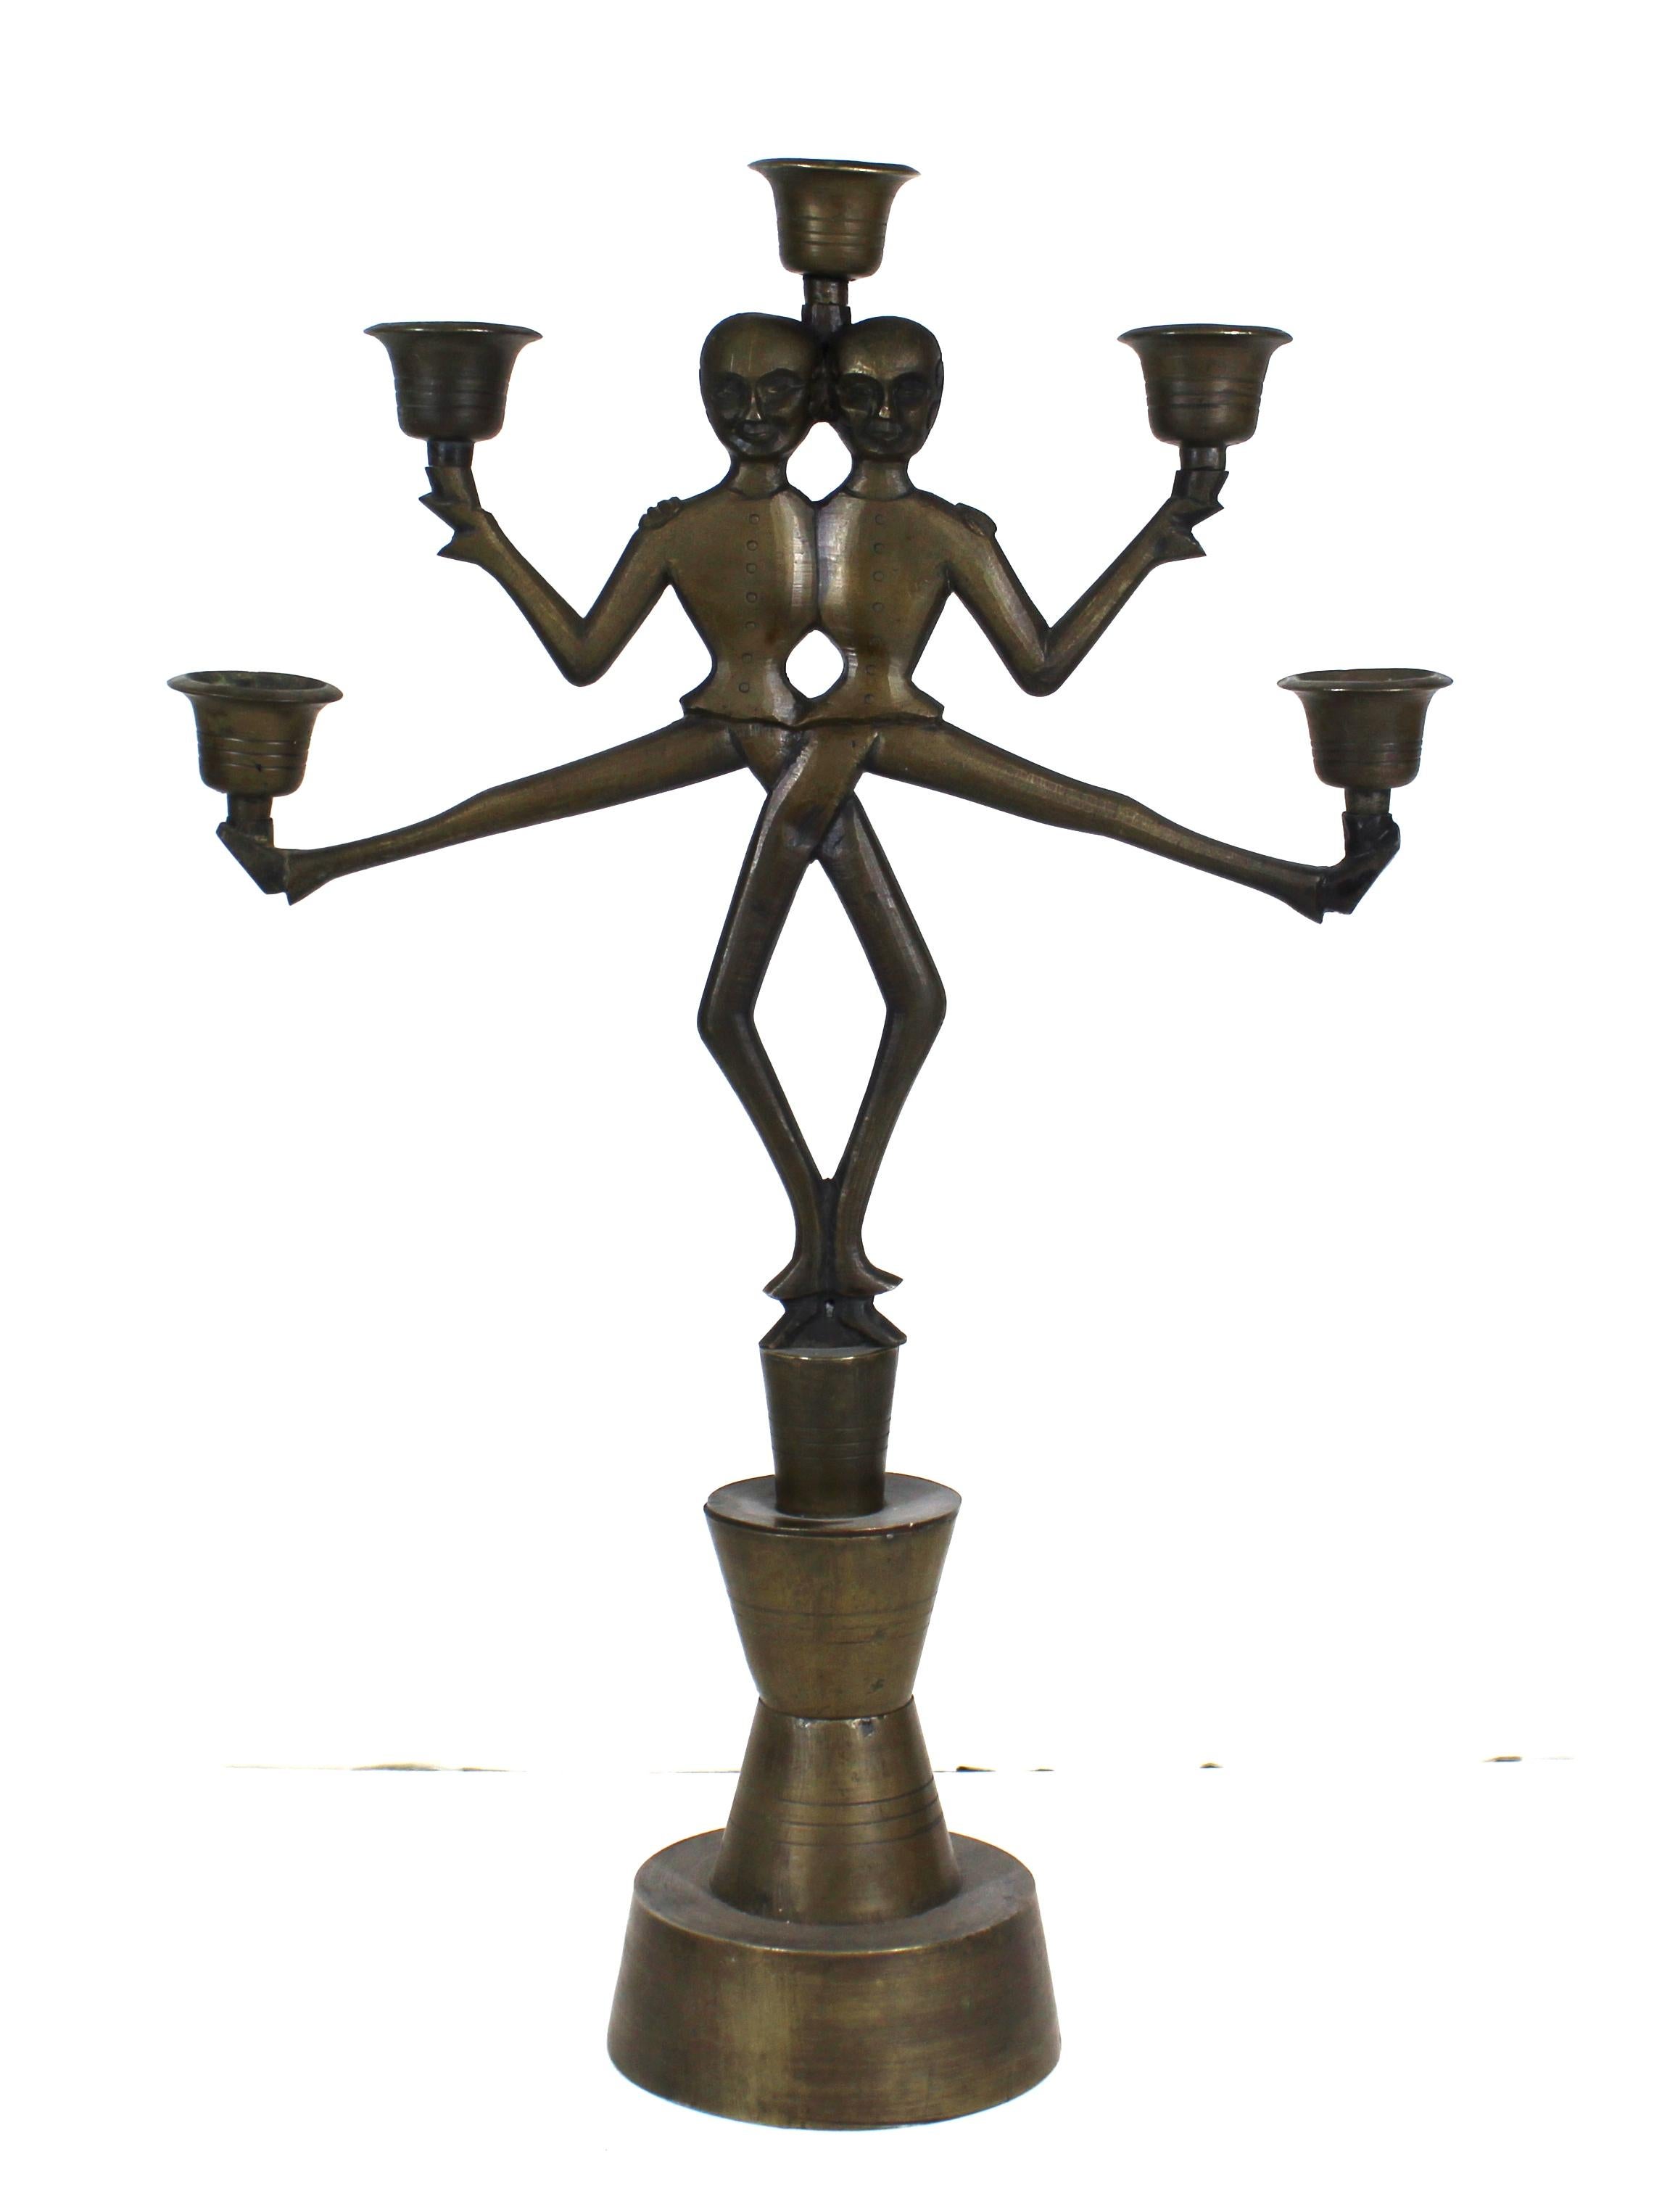 Russian Art Deco period pair of candelabras in heavy-cast bronze, featuring each a pair of dancing Cossack acrobats. The pair has their original and unaltered patina and was made during the 1920s in Russia. In great antique condition with